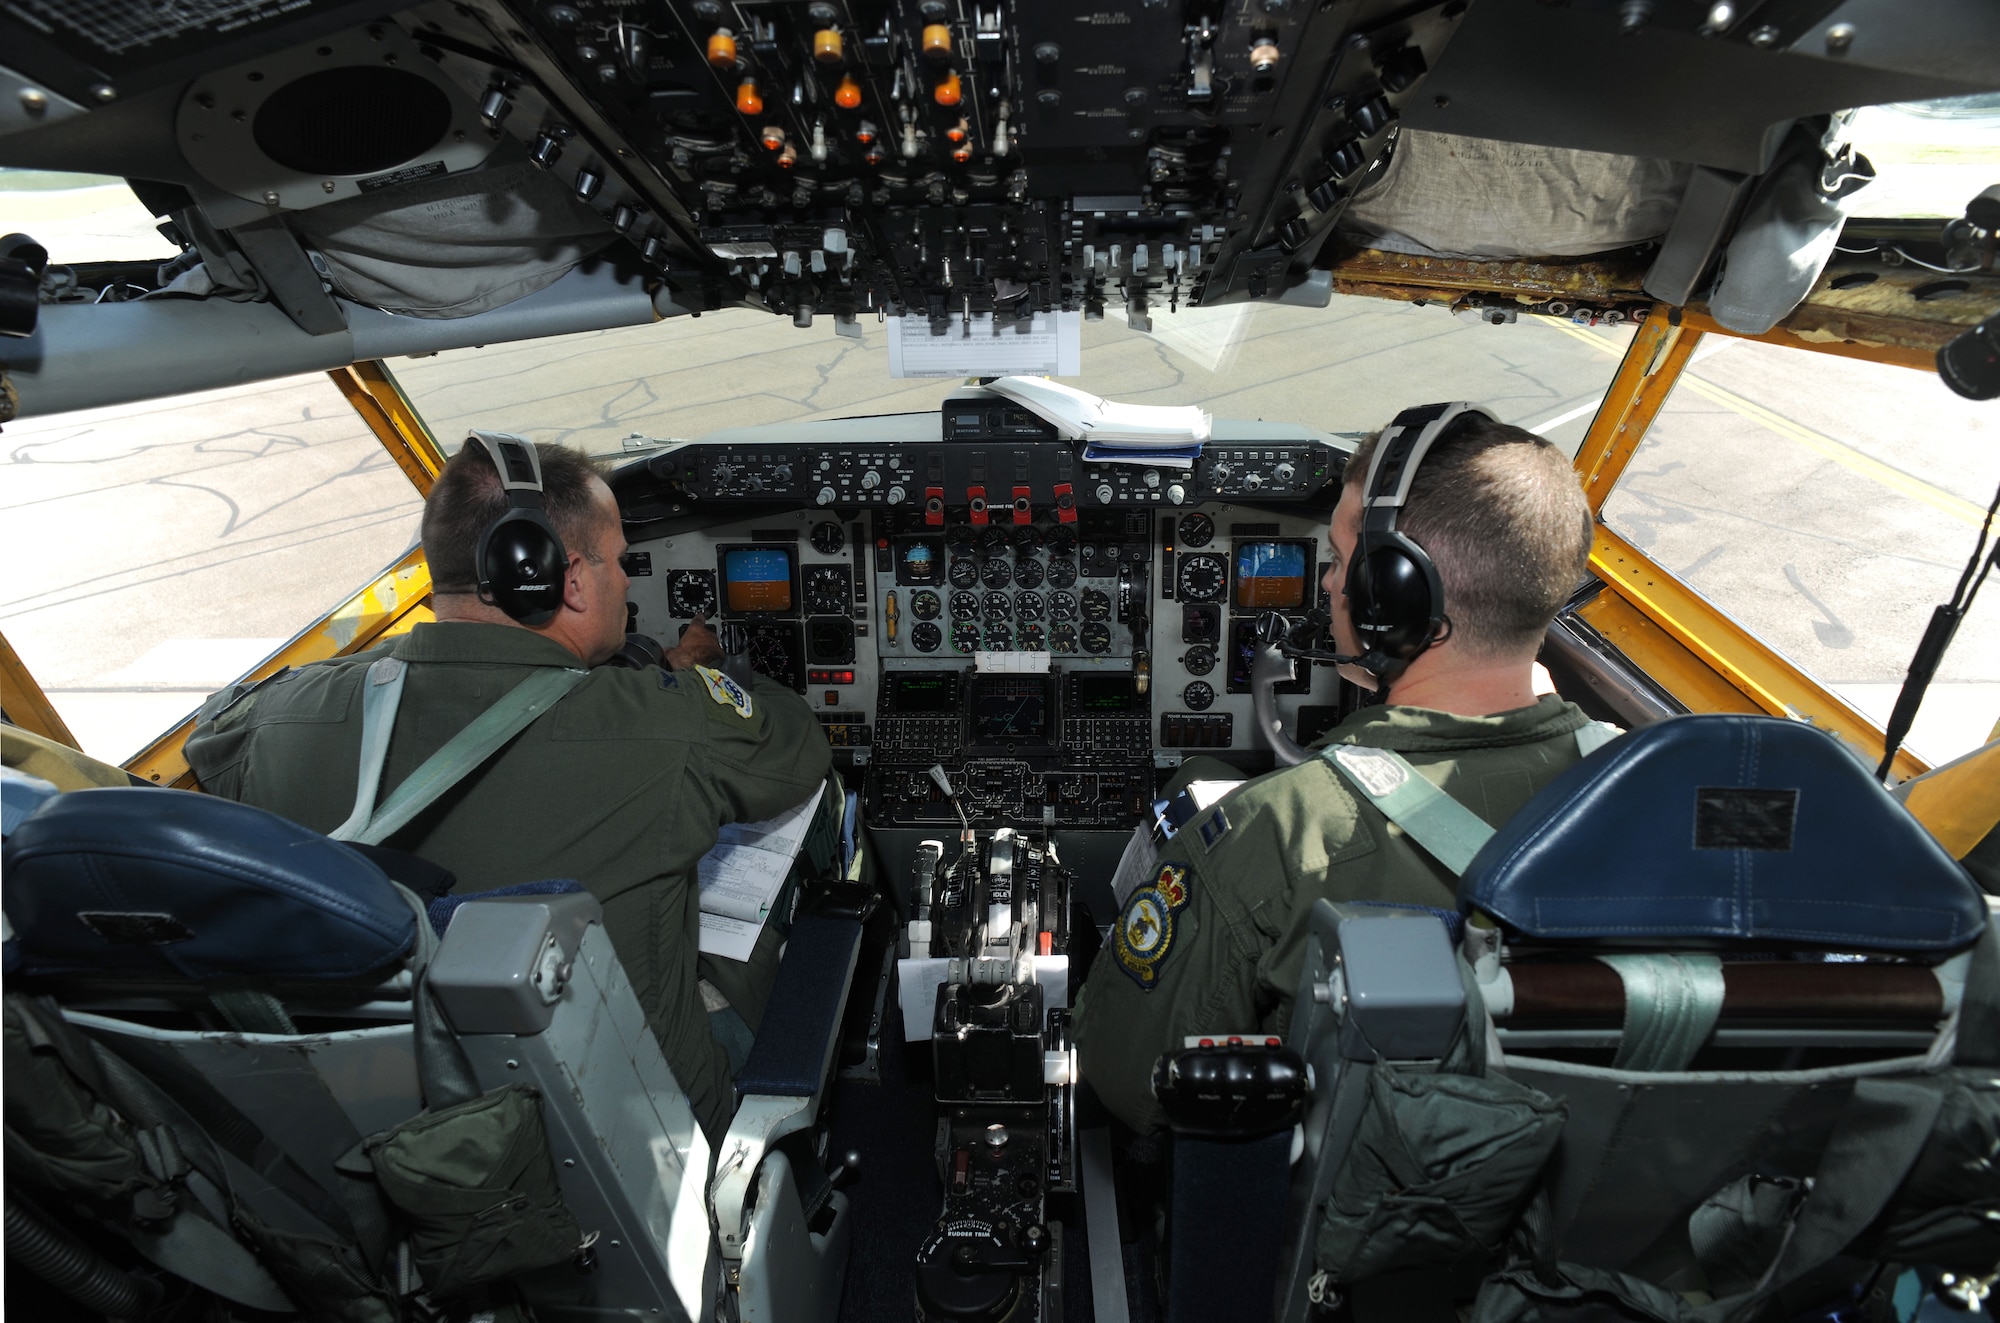 U.S. Air Force Col. Kenneth T. Bibb, Jr., left, 100th Air Refueling Wing commander and KC-135 Stratotanker pilot, and U.S. Air Force Capt. Justin Skinner, 351st Air Refueling Squadron pilot from Choctaw, Okla., perform their preflight checklist before a flight to Moron Air Base, Spain, Aug. 27, 2014, on RAF Mildenhall, England. Bibb is qualified as a command pilot with more than 4,500 flight hours and tries to fly whenever his schedule as a wing commander allows. (U.S. Air Force photo/Senior Airman Kate Maurer/Released)